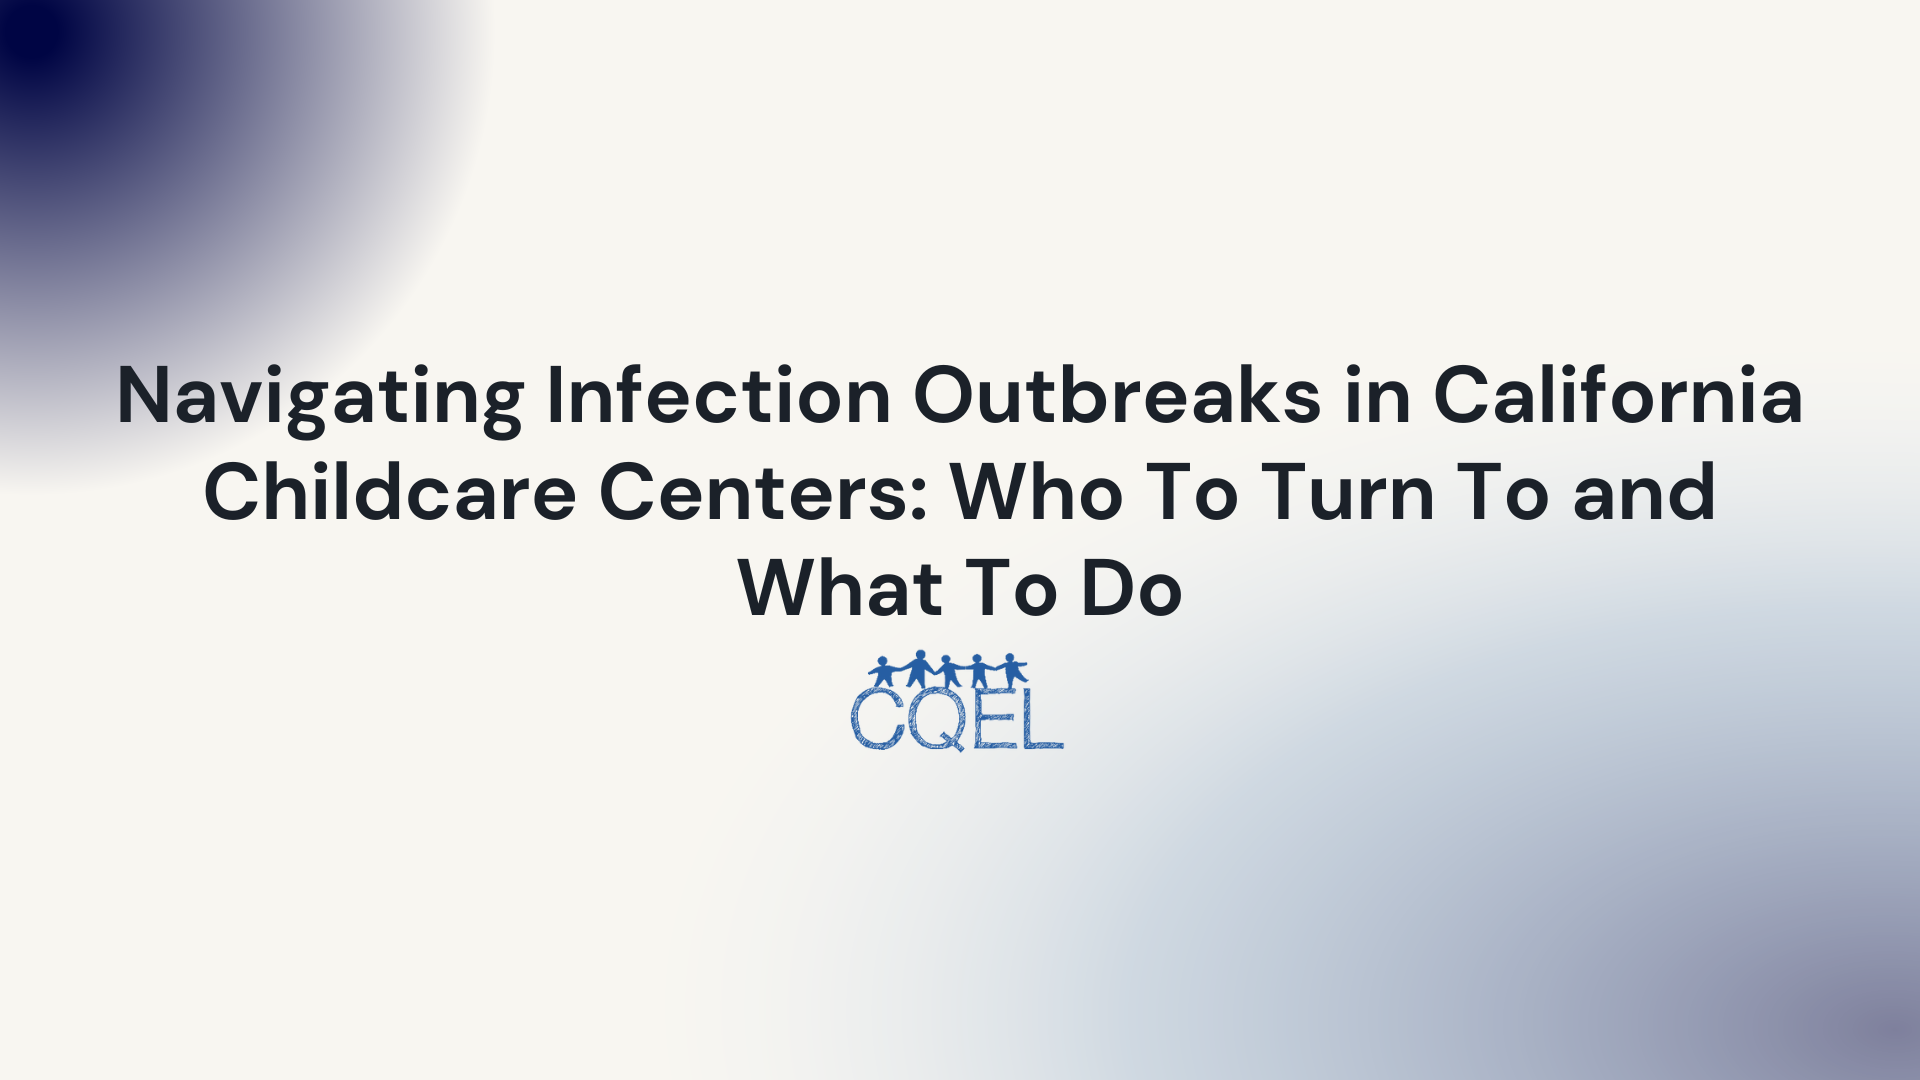 Navigating Infection Outbreaks in California Childcare Centers: Who To Turn To and What To Do